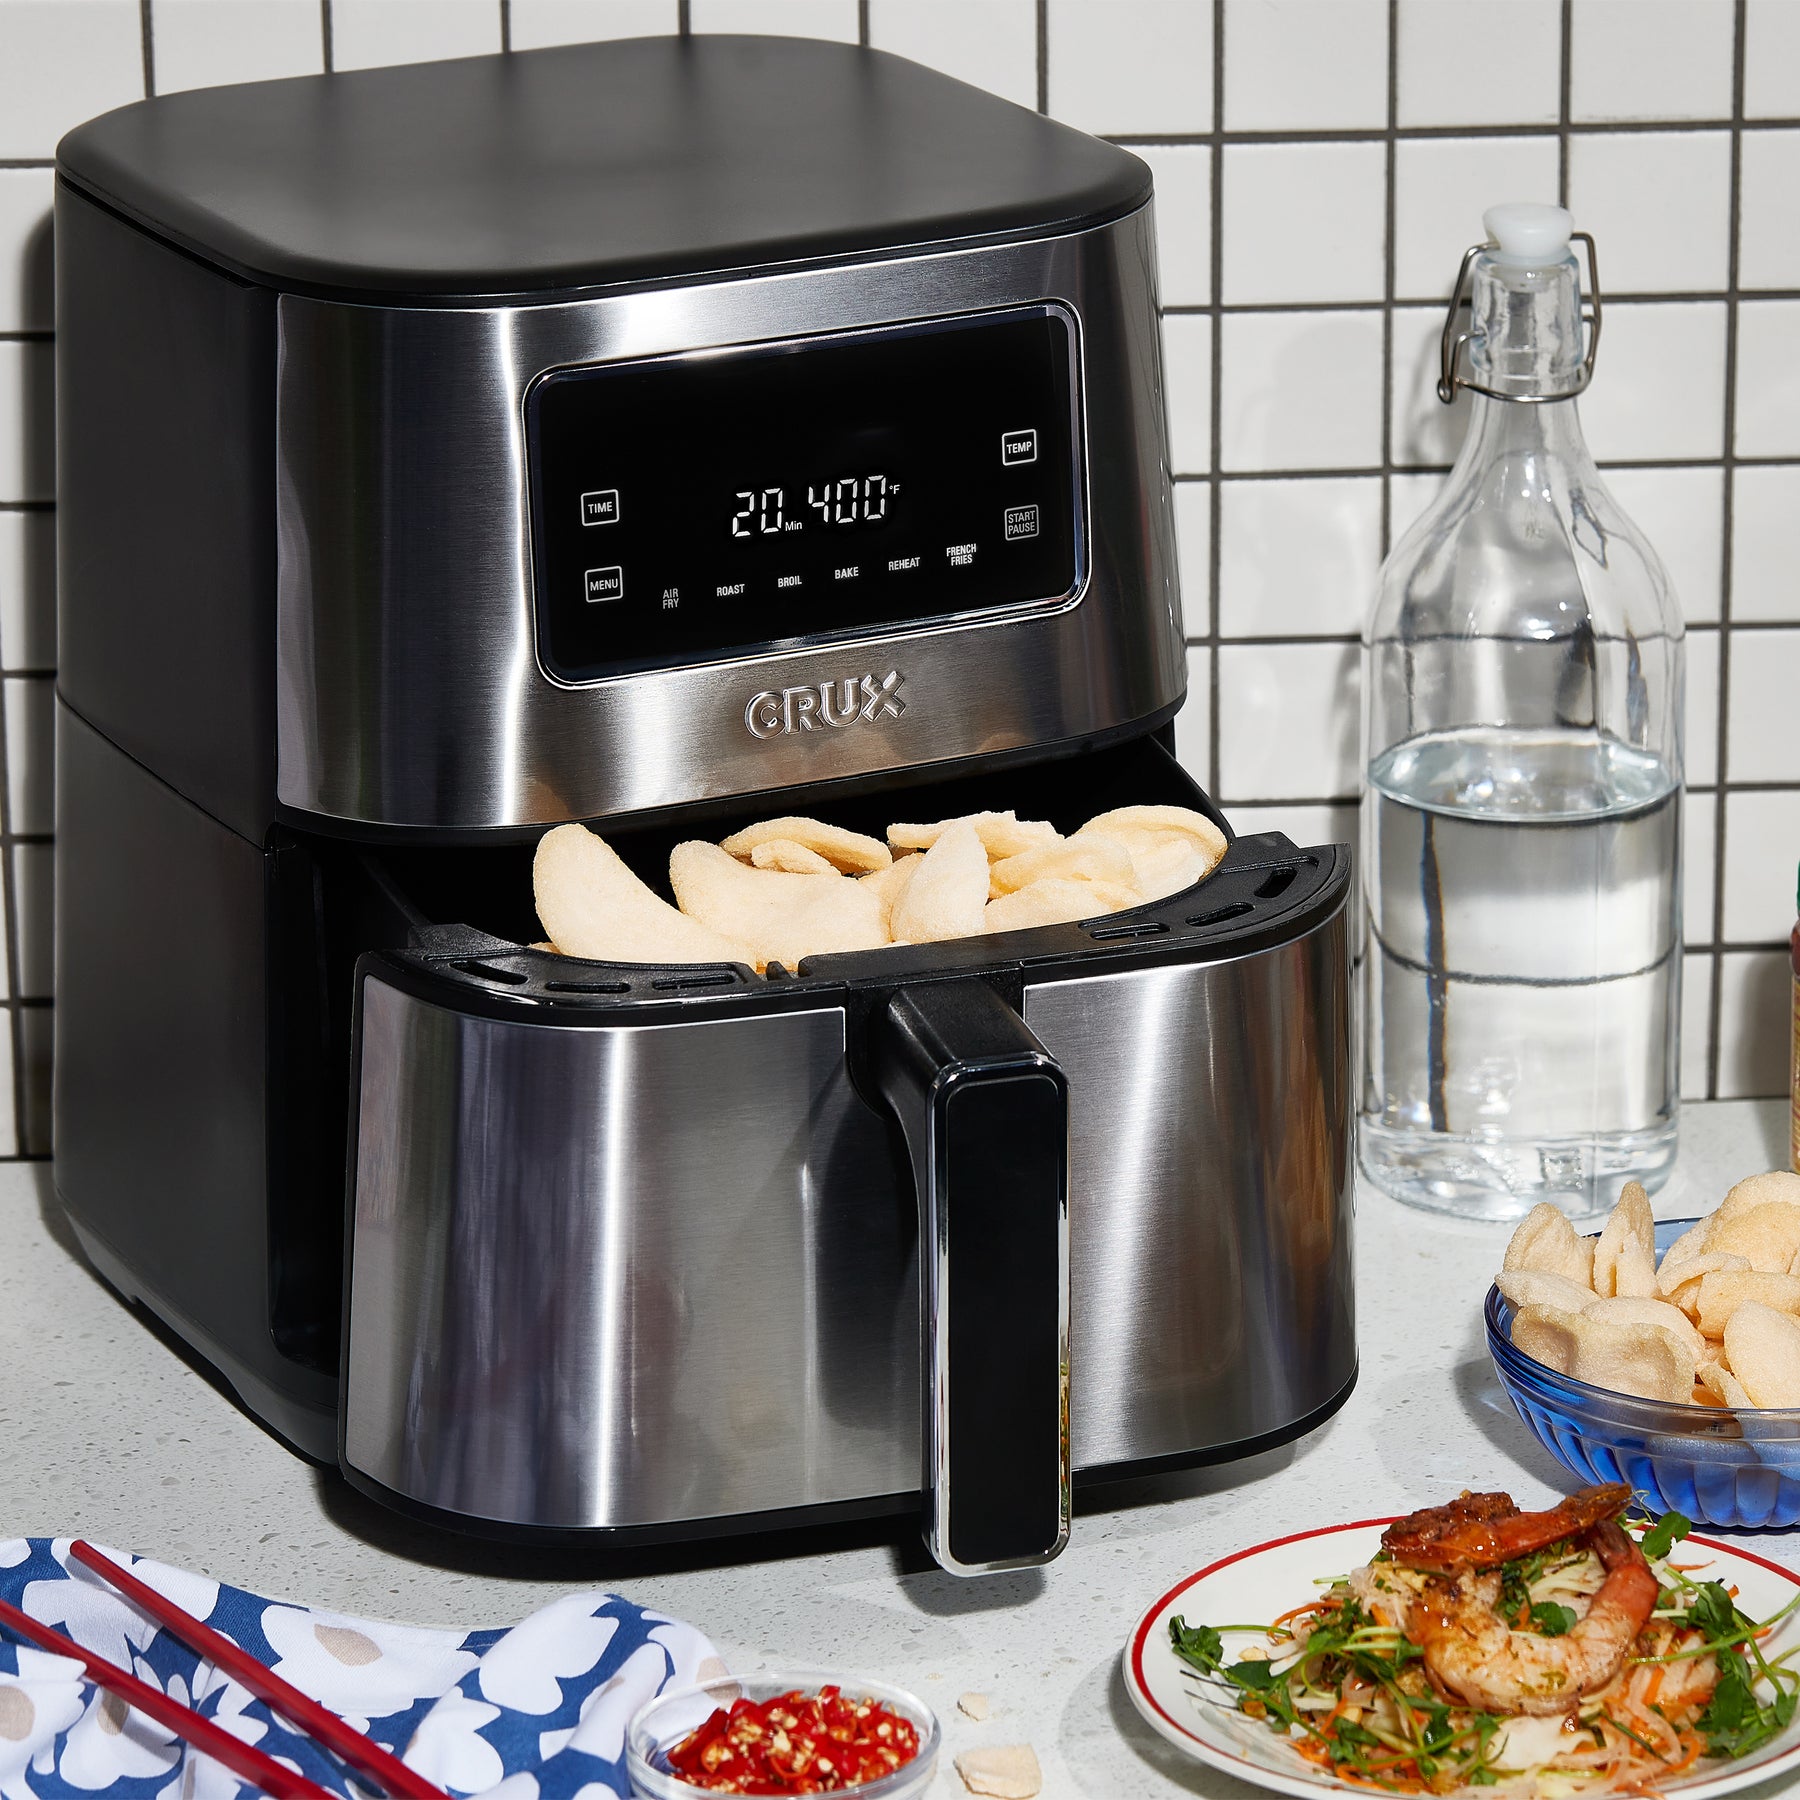 Crux 6 Qt. Digital Air Fryer 1500 Watt - Stainless Steel - The WiC Project  - Faith, Product Reviews, Recipes, Giveaways